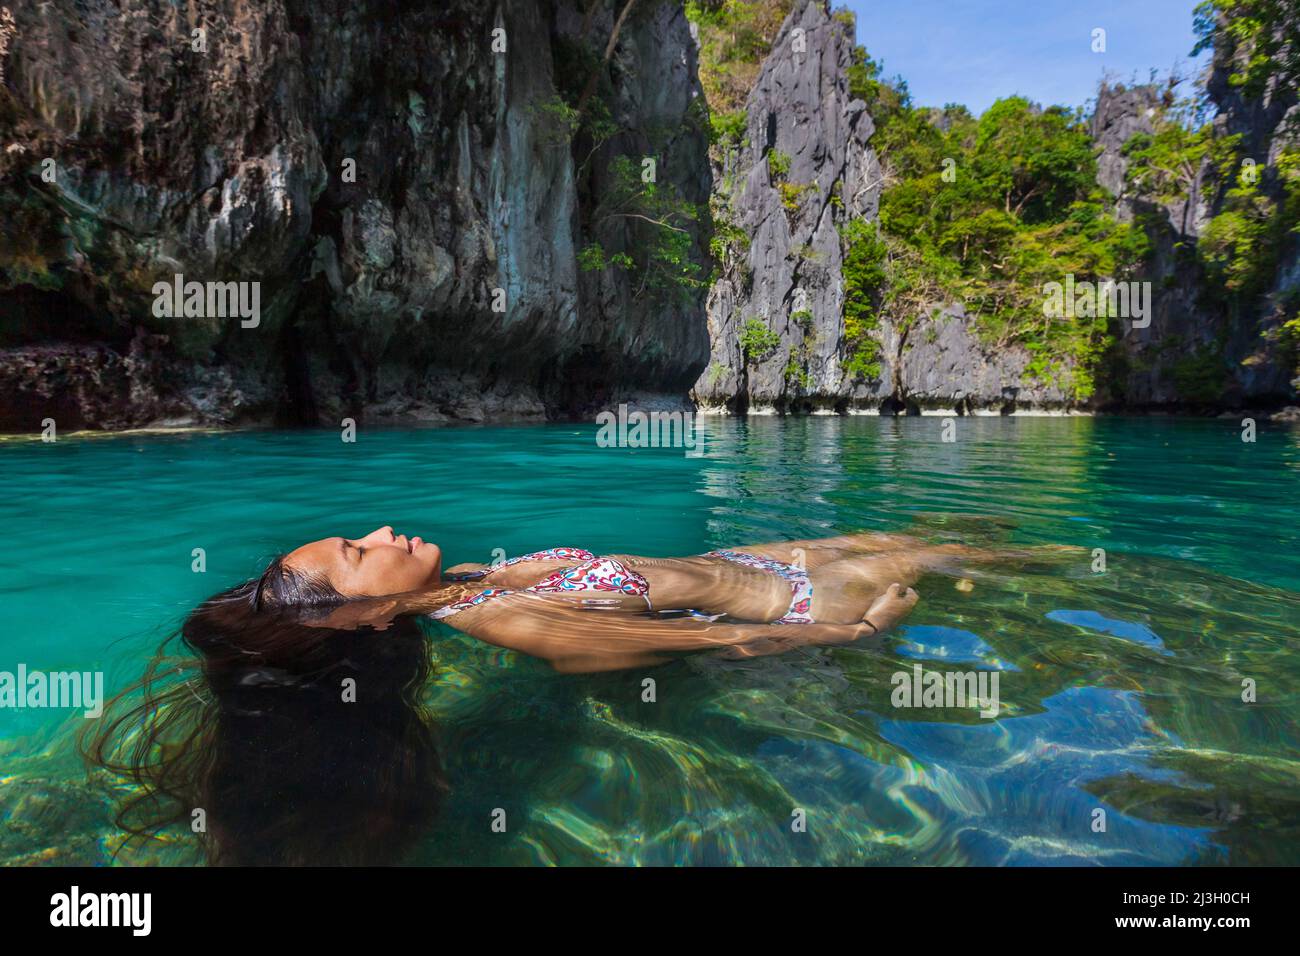 Philippines, Palawan, El Nido, Bacuit Archipelago, Miniloc Island, Small Lagoon, a young Filipina woman wearing a bikini re-enacts John Everett Millais' painting, Ophelia, in turquoise water and tropical environment, surrounded by karst cliffs Stock Photo